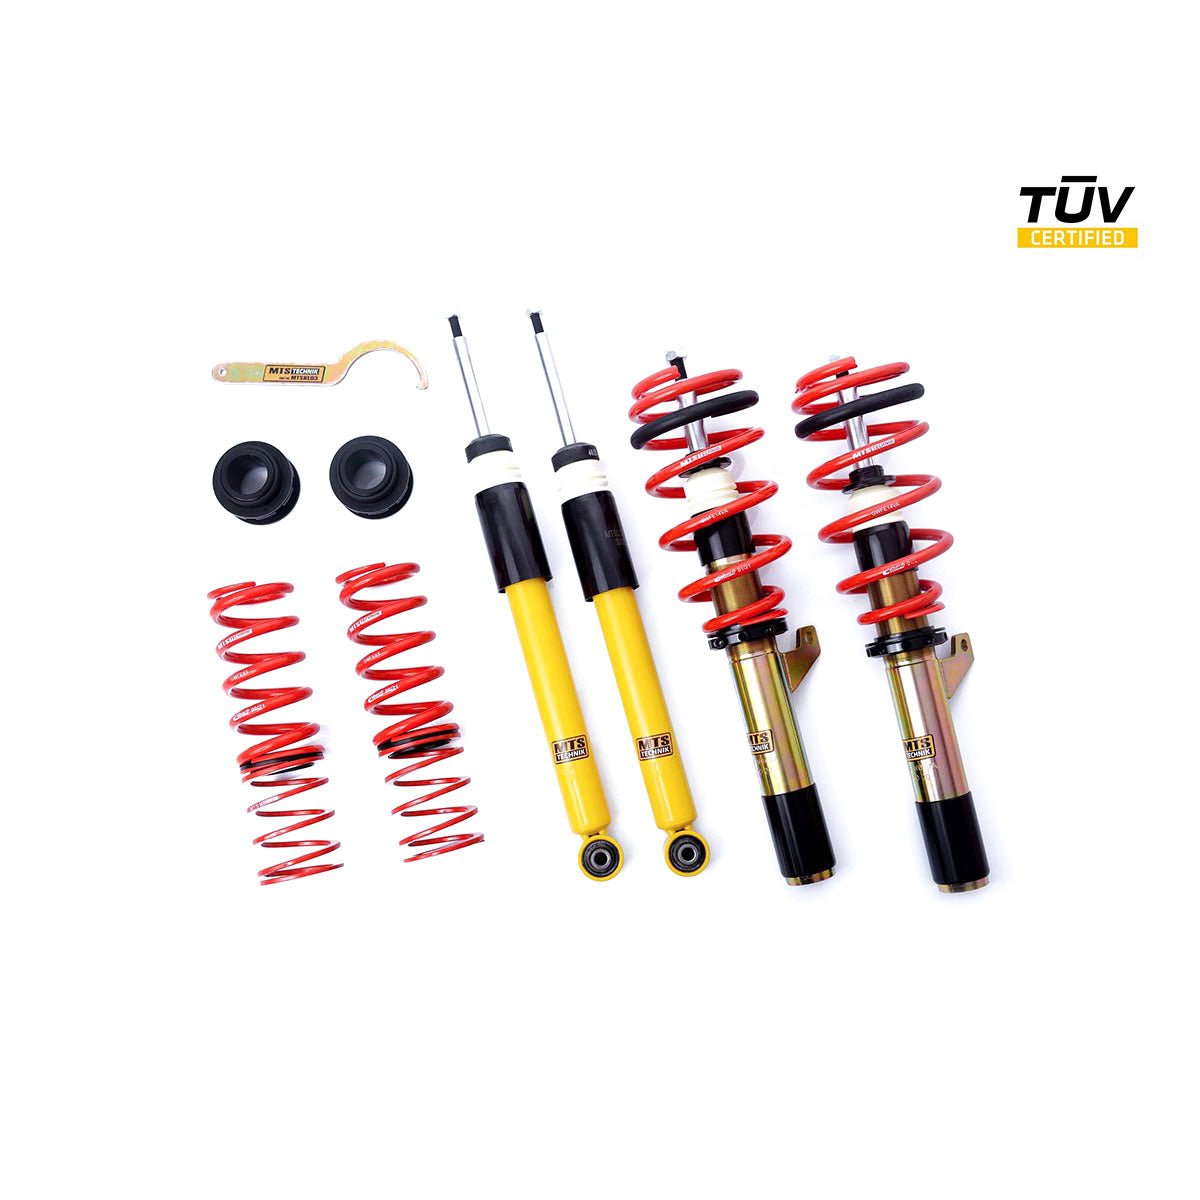 MTS TECHNIK coilover kit STREET Audi A3 8V Cabrio (with TÜV) - PARTS33 GmbH